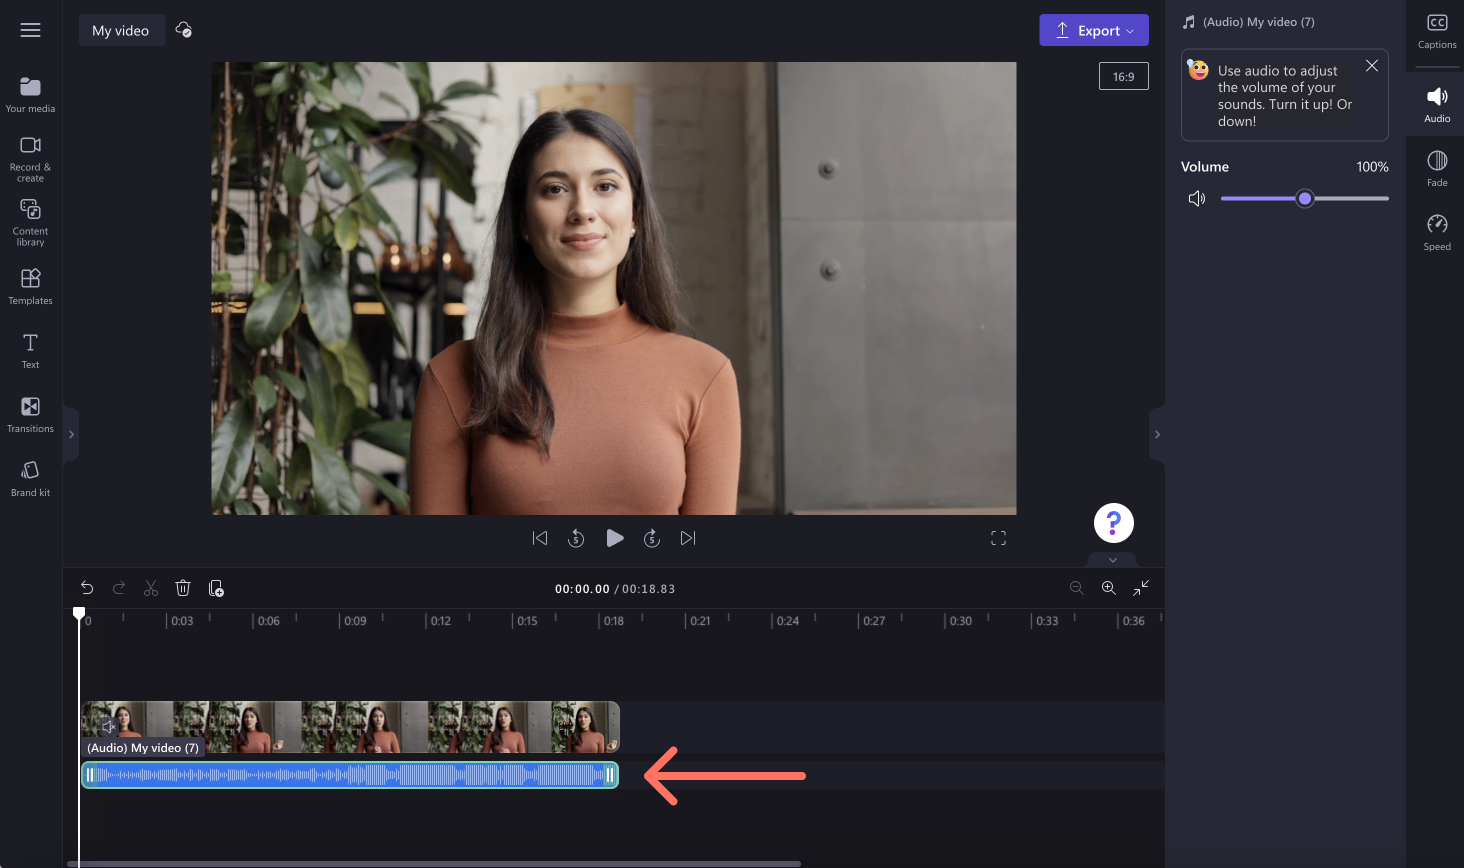 An image of the video and audio separate on the timeline.